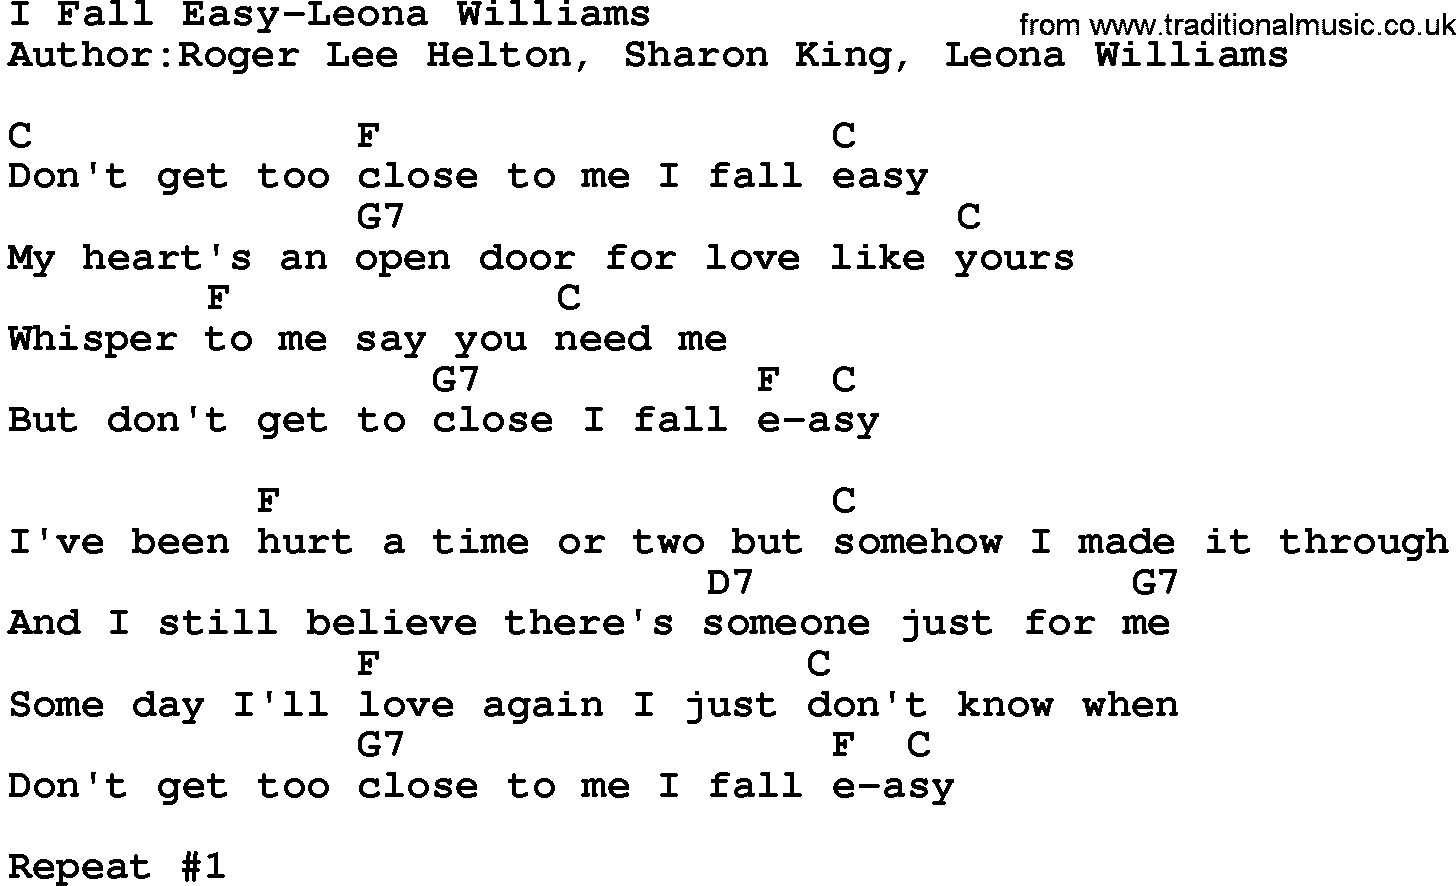 Country music song: I Fall Easy-Leona Williams lyrics and chords